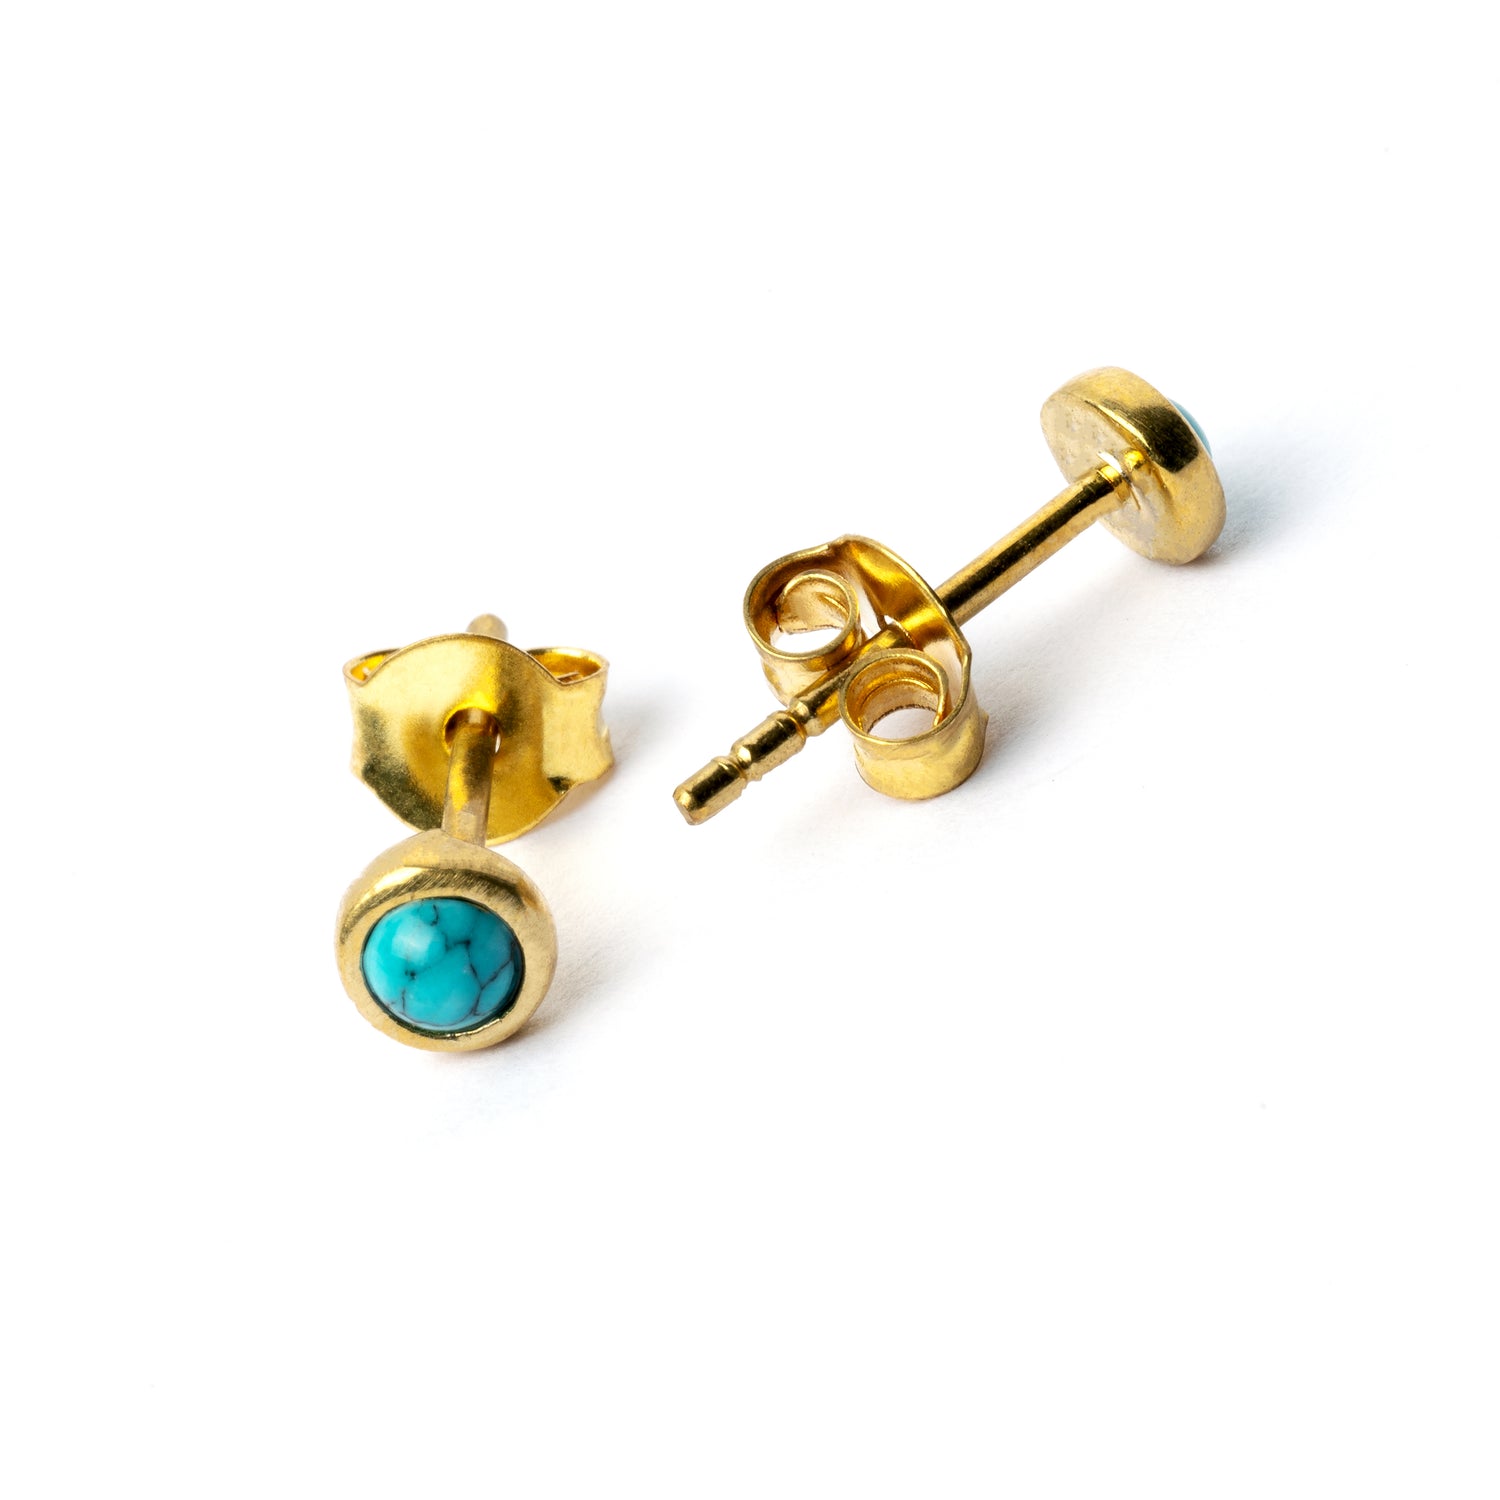 Brass-Ear-Stud-set-with-Turquoise_1